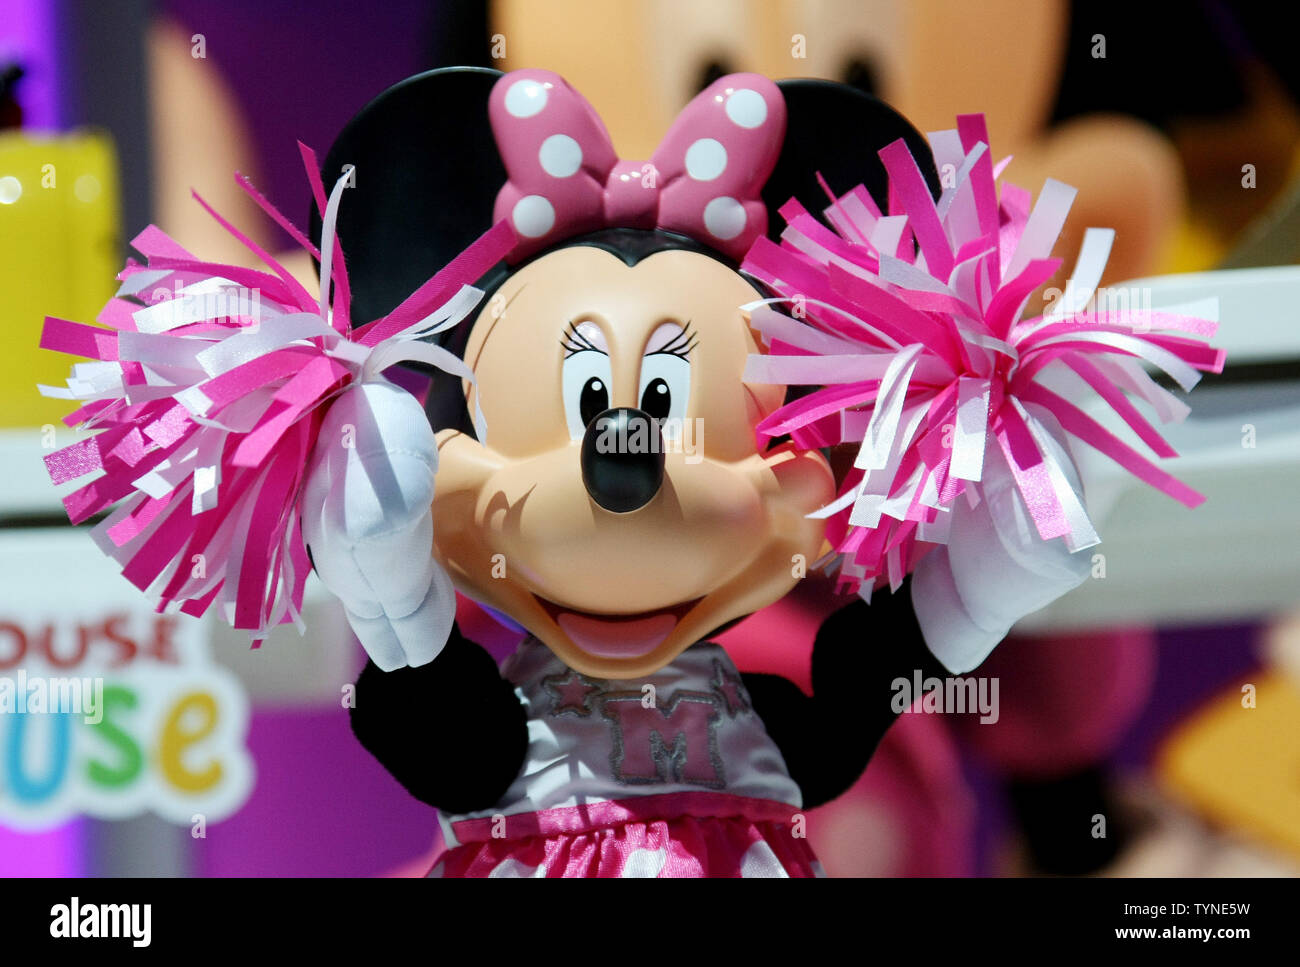 The new cheerleader Minnie Mouse is unveiled at the 110th annual American International Toy Fair held at the Jacob Javits Center on February 10, 2013 in New York City.     UPI /Monika Graff Stock Photo